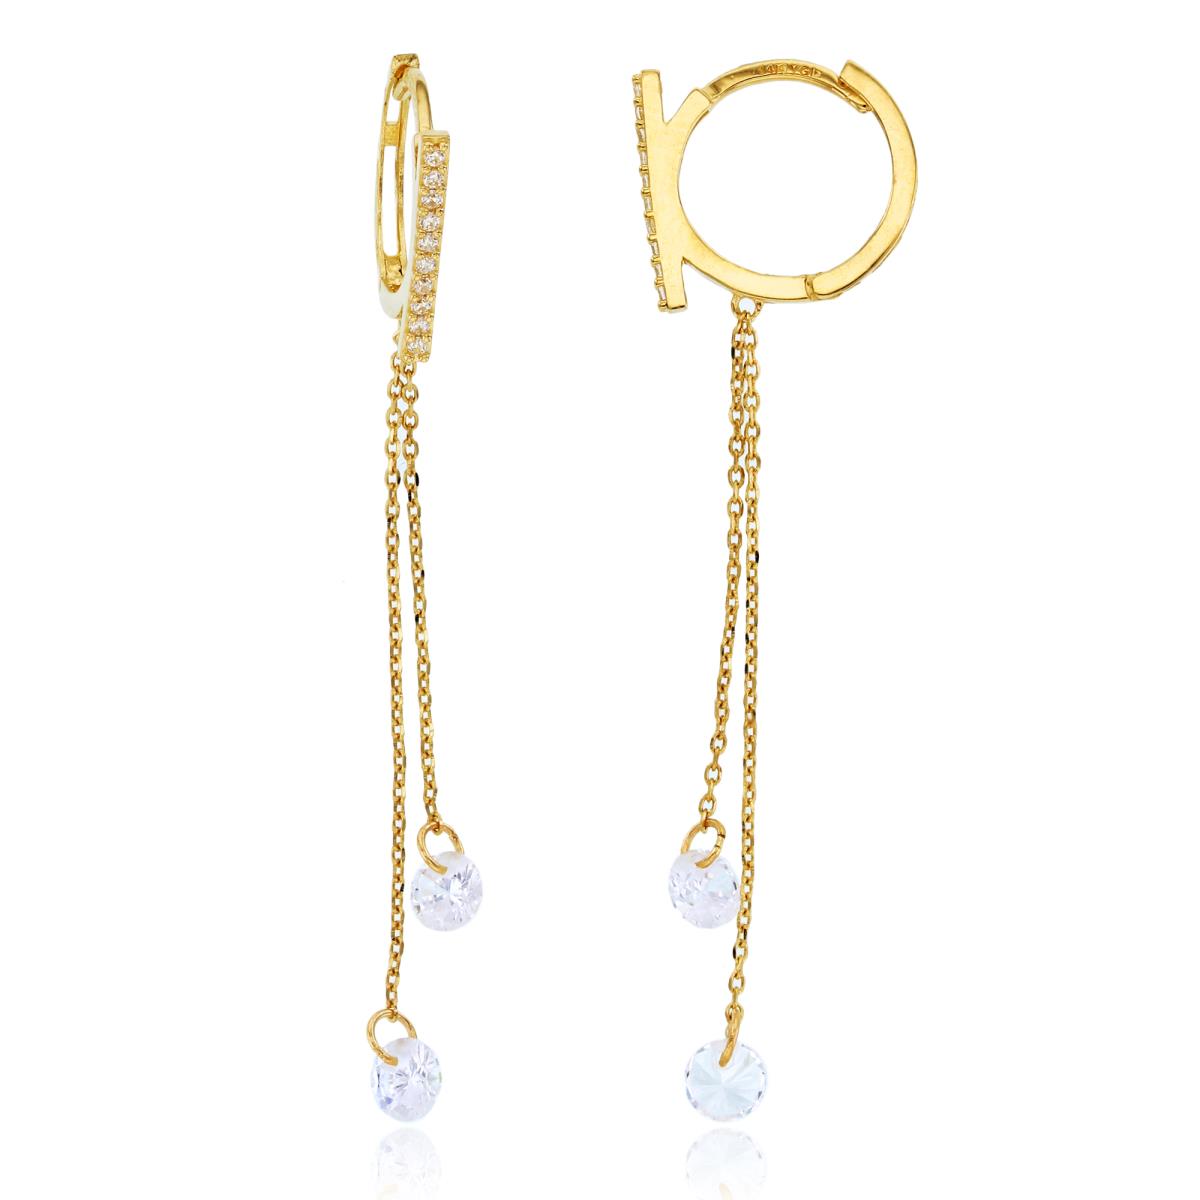 10K Yellow Gold 4mm Rnd Briolette CZ Dangling on Chain with Huggie Earrings